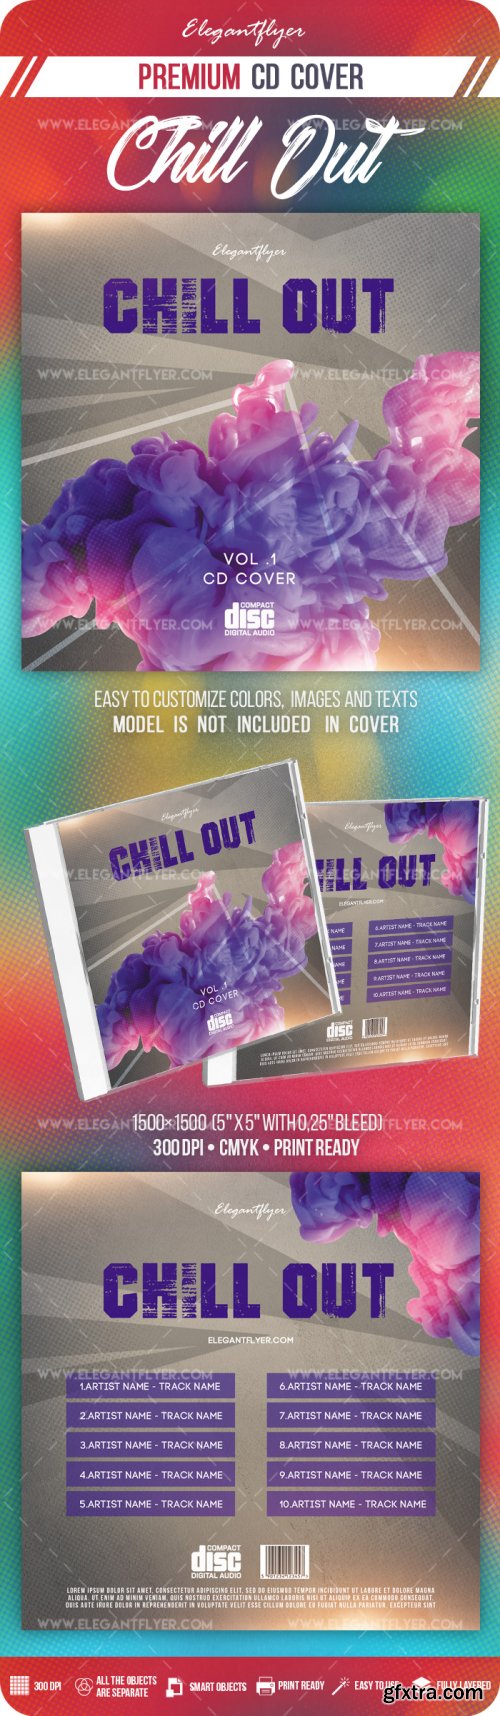 Chill Out V3 2018 Premium CD Cover PSD Template